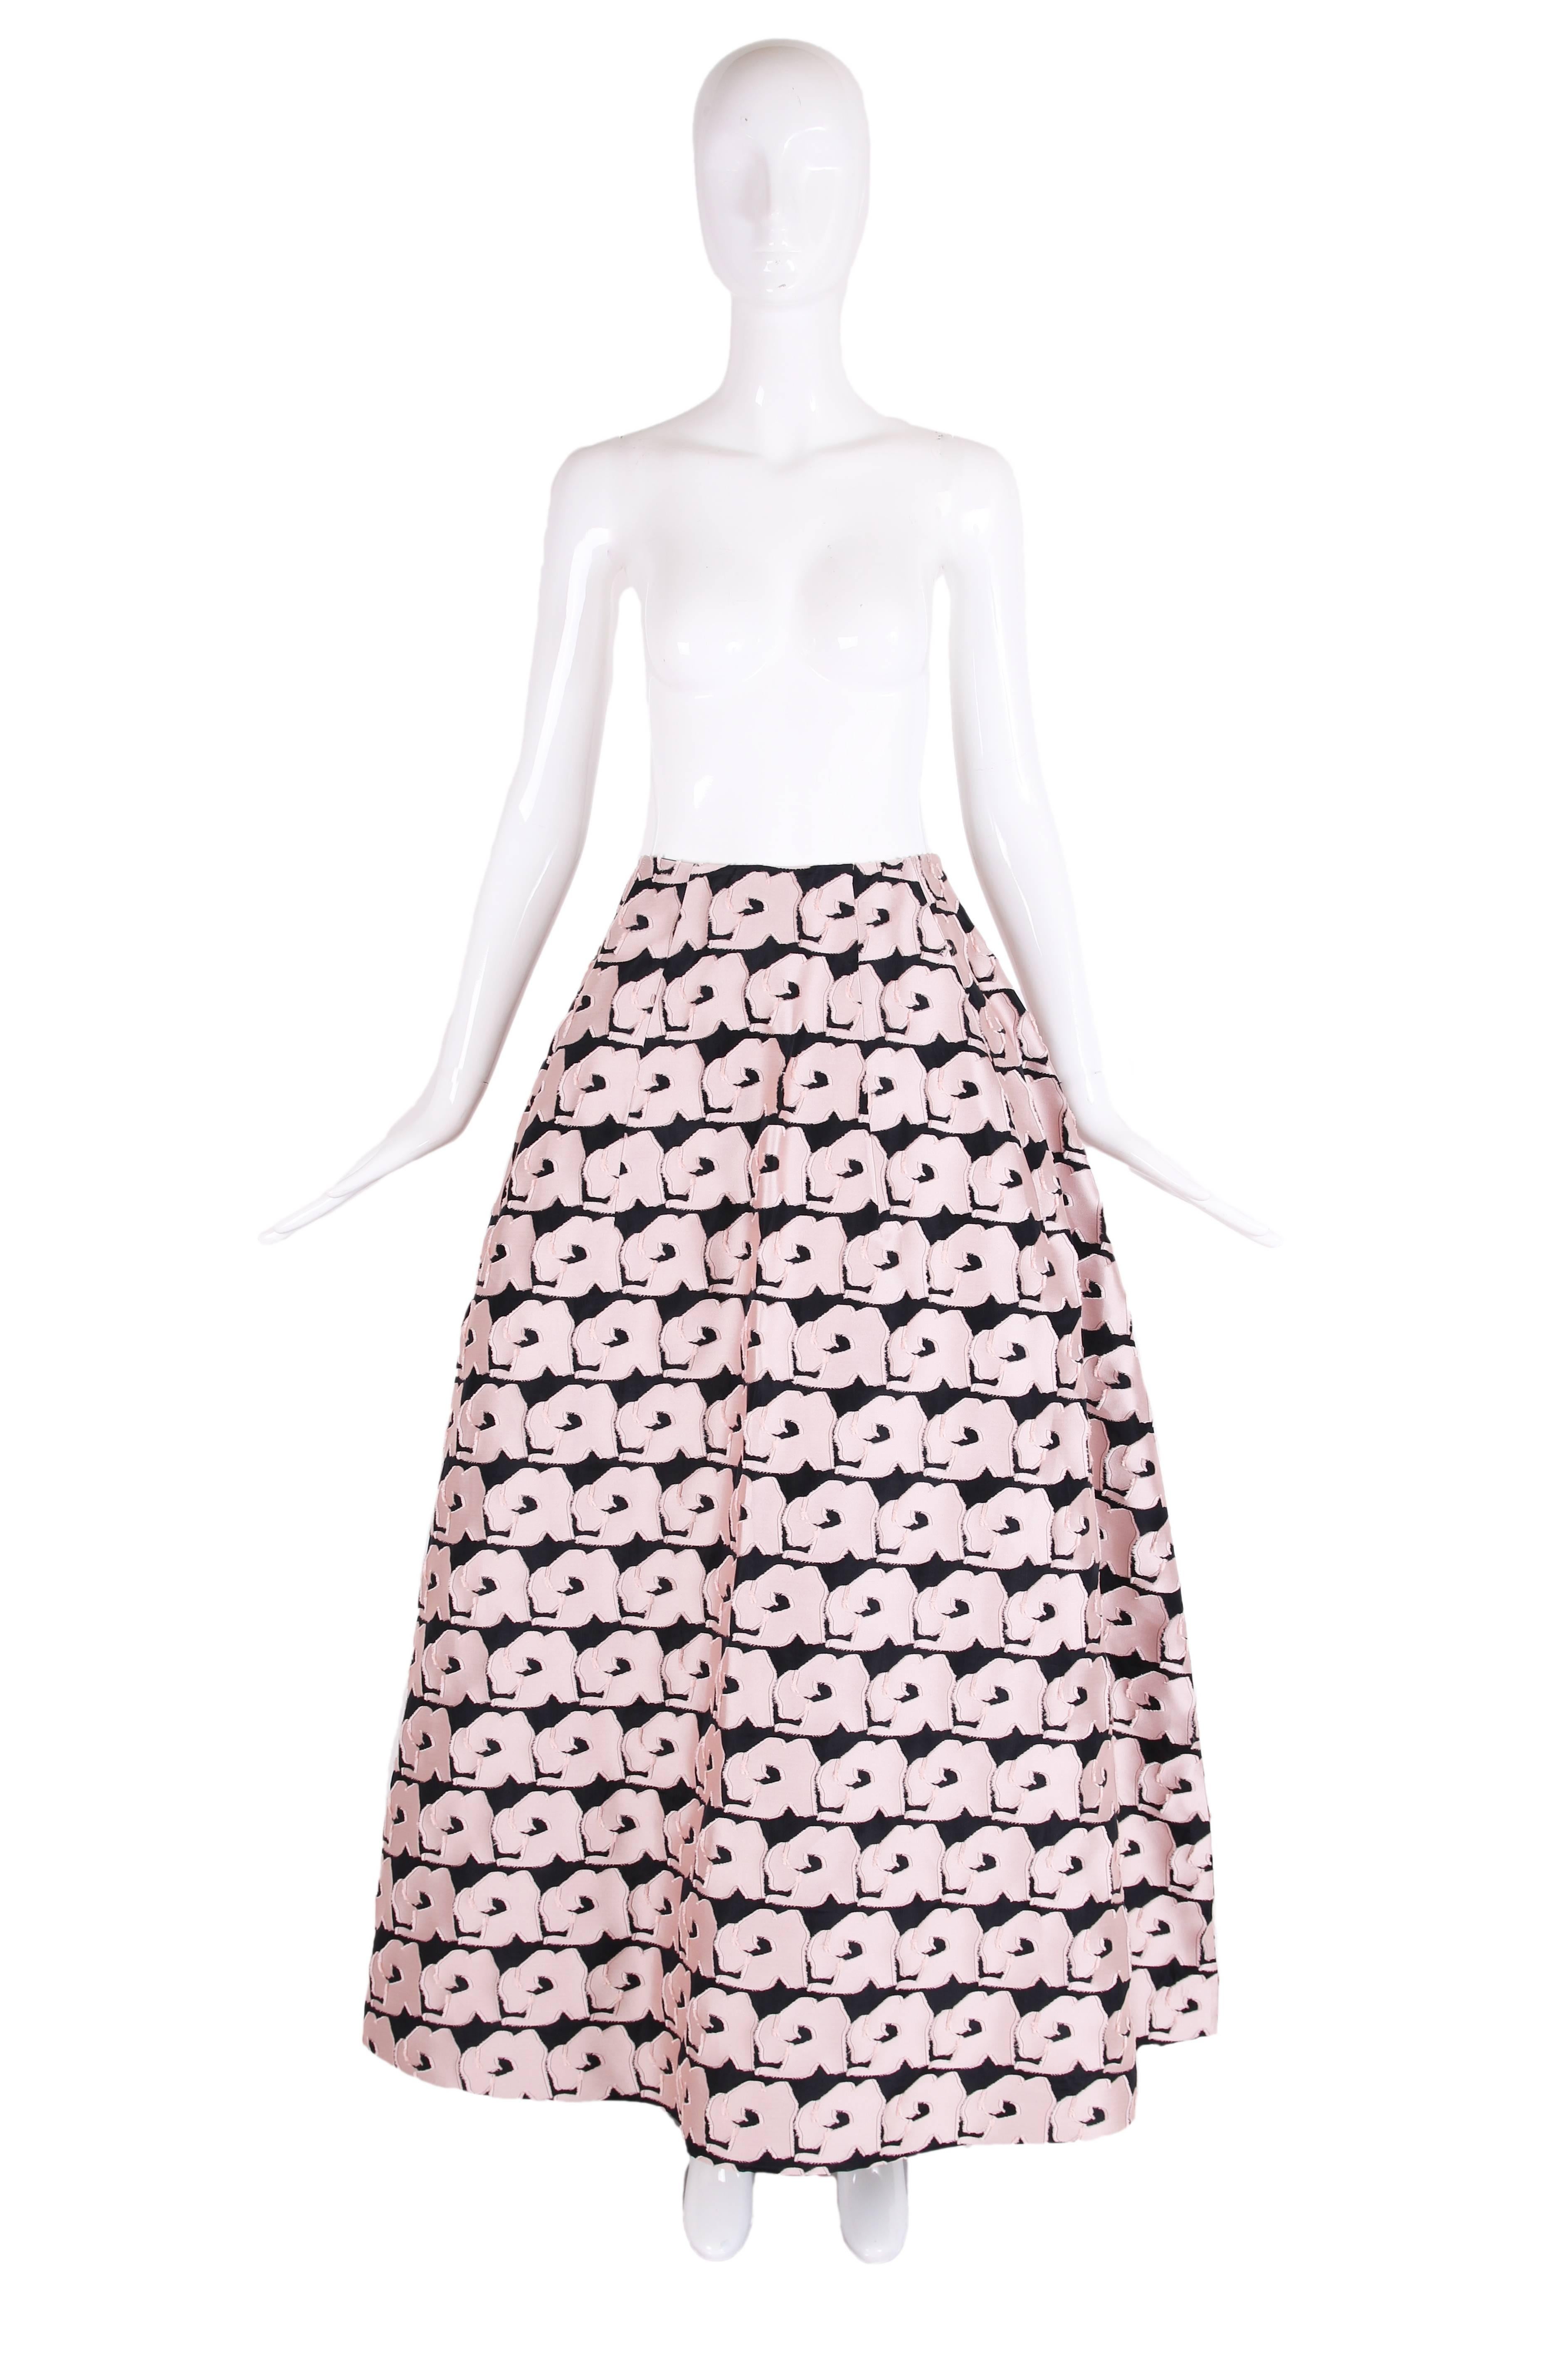 2013 Christian Dior blush pink floral ball skirt set on a black background. It is lined in silk with tulle to give its shape, there is a side zipper closure with hook and eye. Size tag 8. In excellent condition - only worn once by original owner for